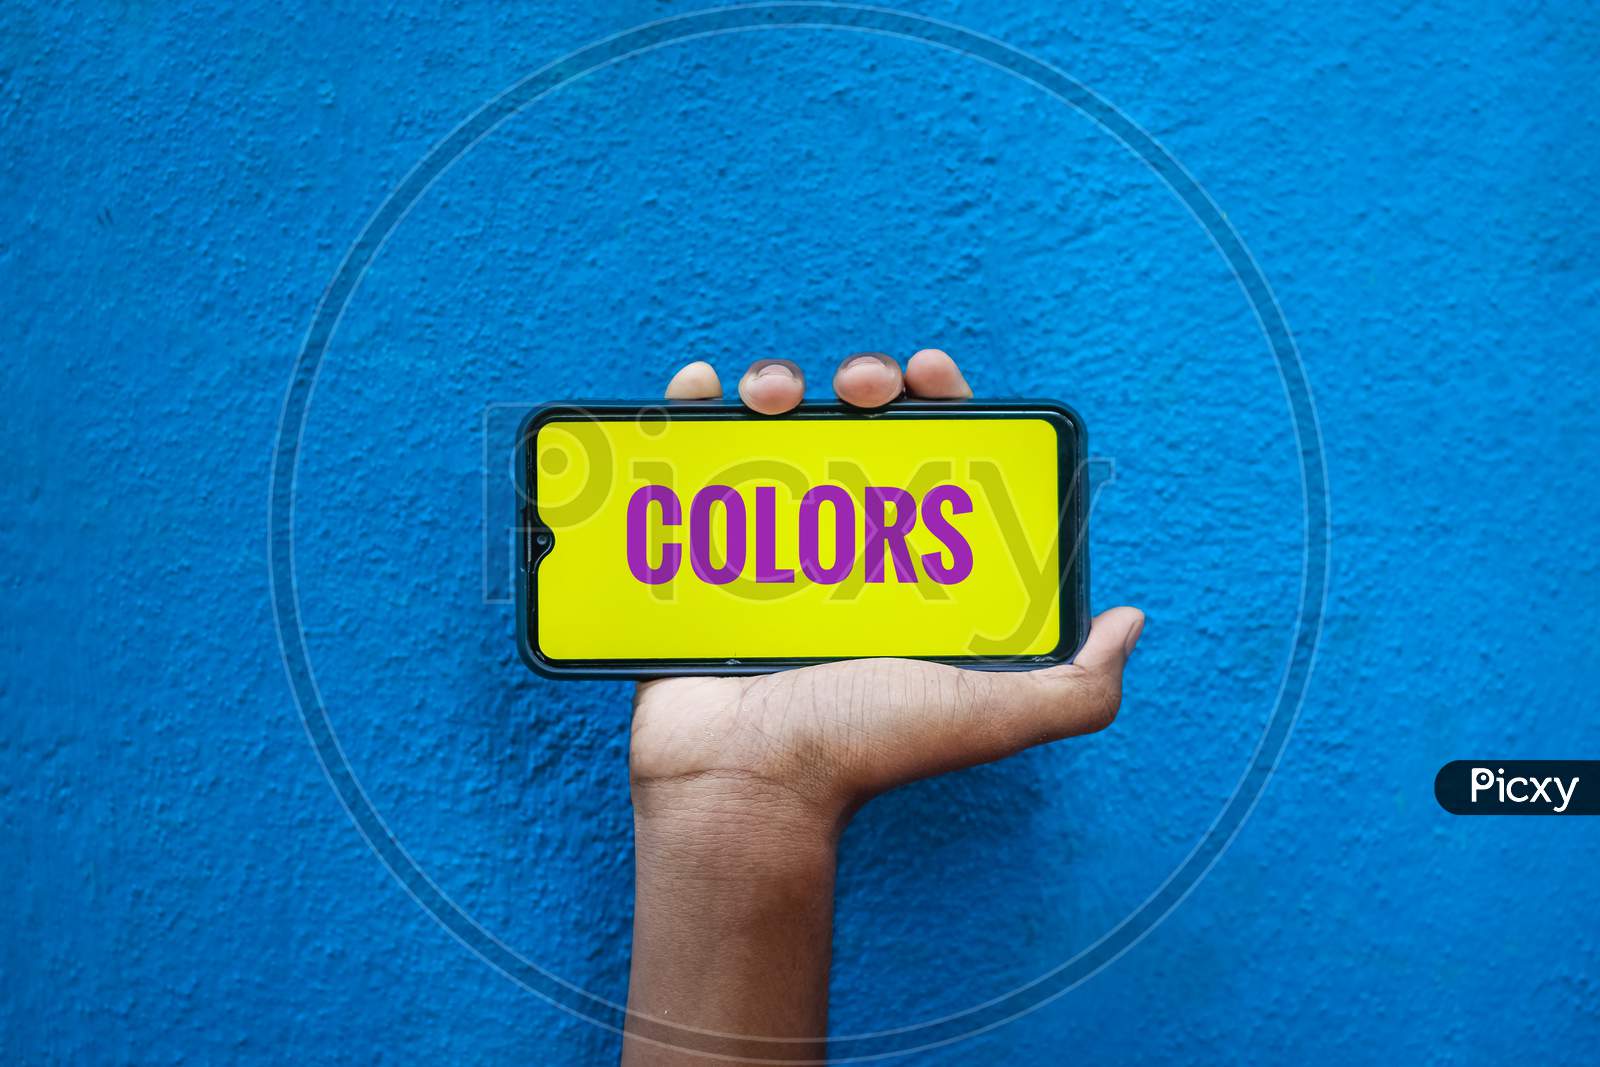 Colors Word On Smart Phone Screen Isolated On Blue Background With Copy Space For Text. Person Holding Mobile On His Hand And Showing Front Of The Screen Wording Colors.